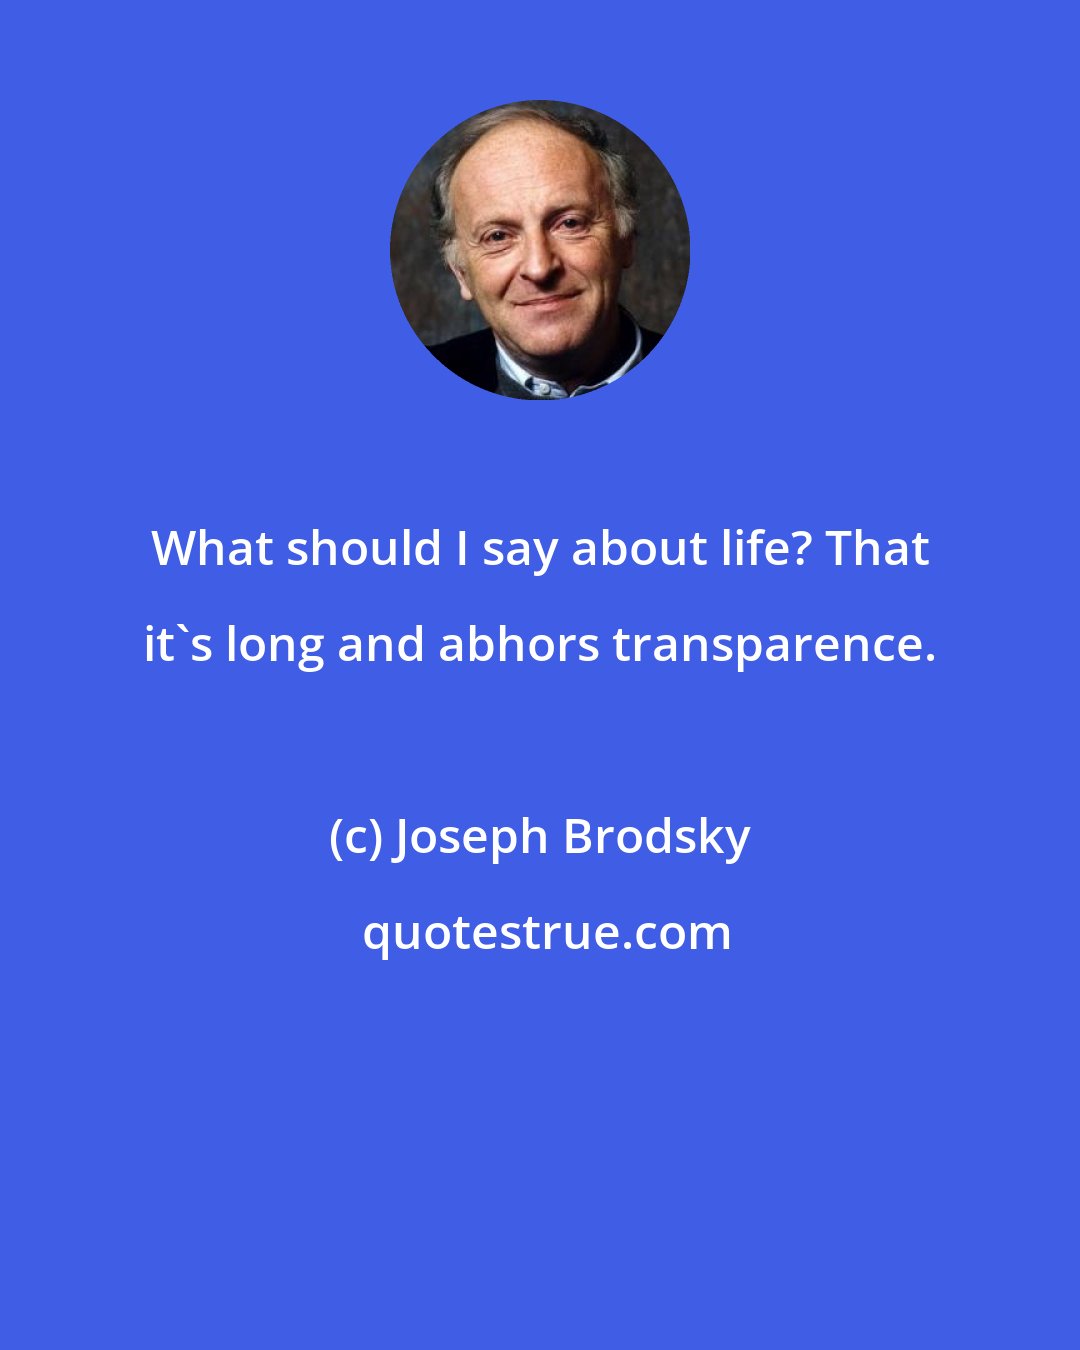 Joseph Brodsky: What should I say about life? That it's long and abhors transparence.